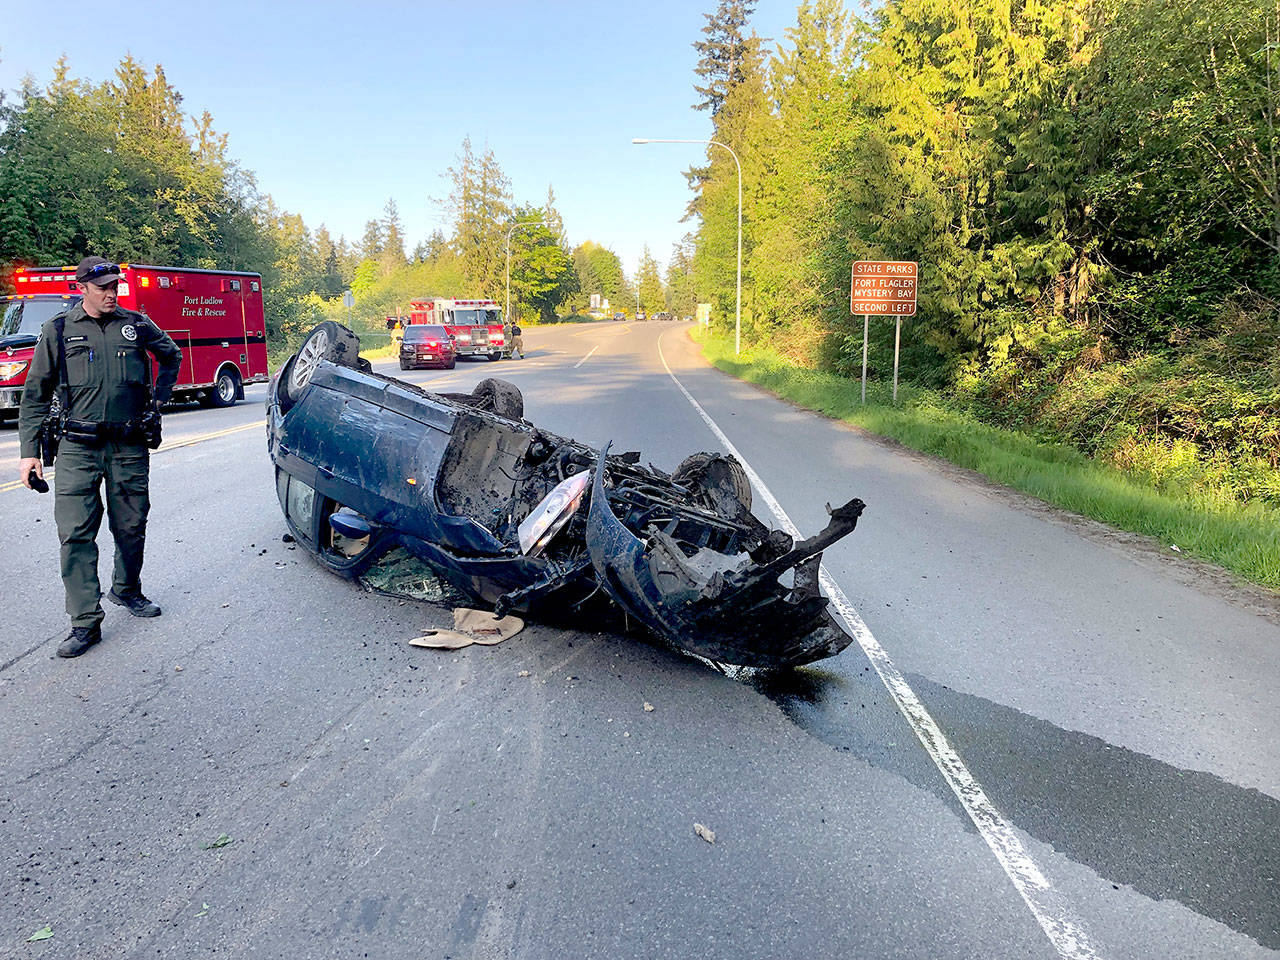 Jefferson County Sheriff’s Deputy Adam Newman surveys the damage to the blue BMW driven by a California man who was ejected from the vehicle Wednesday night on state Highway 116 near Oak Bay Road. The man was airlifted to Harborview Medical Center in Seattle. (Jefferson County Sheriff’s Office)